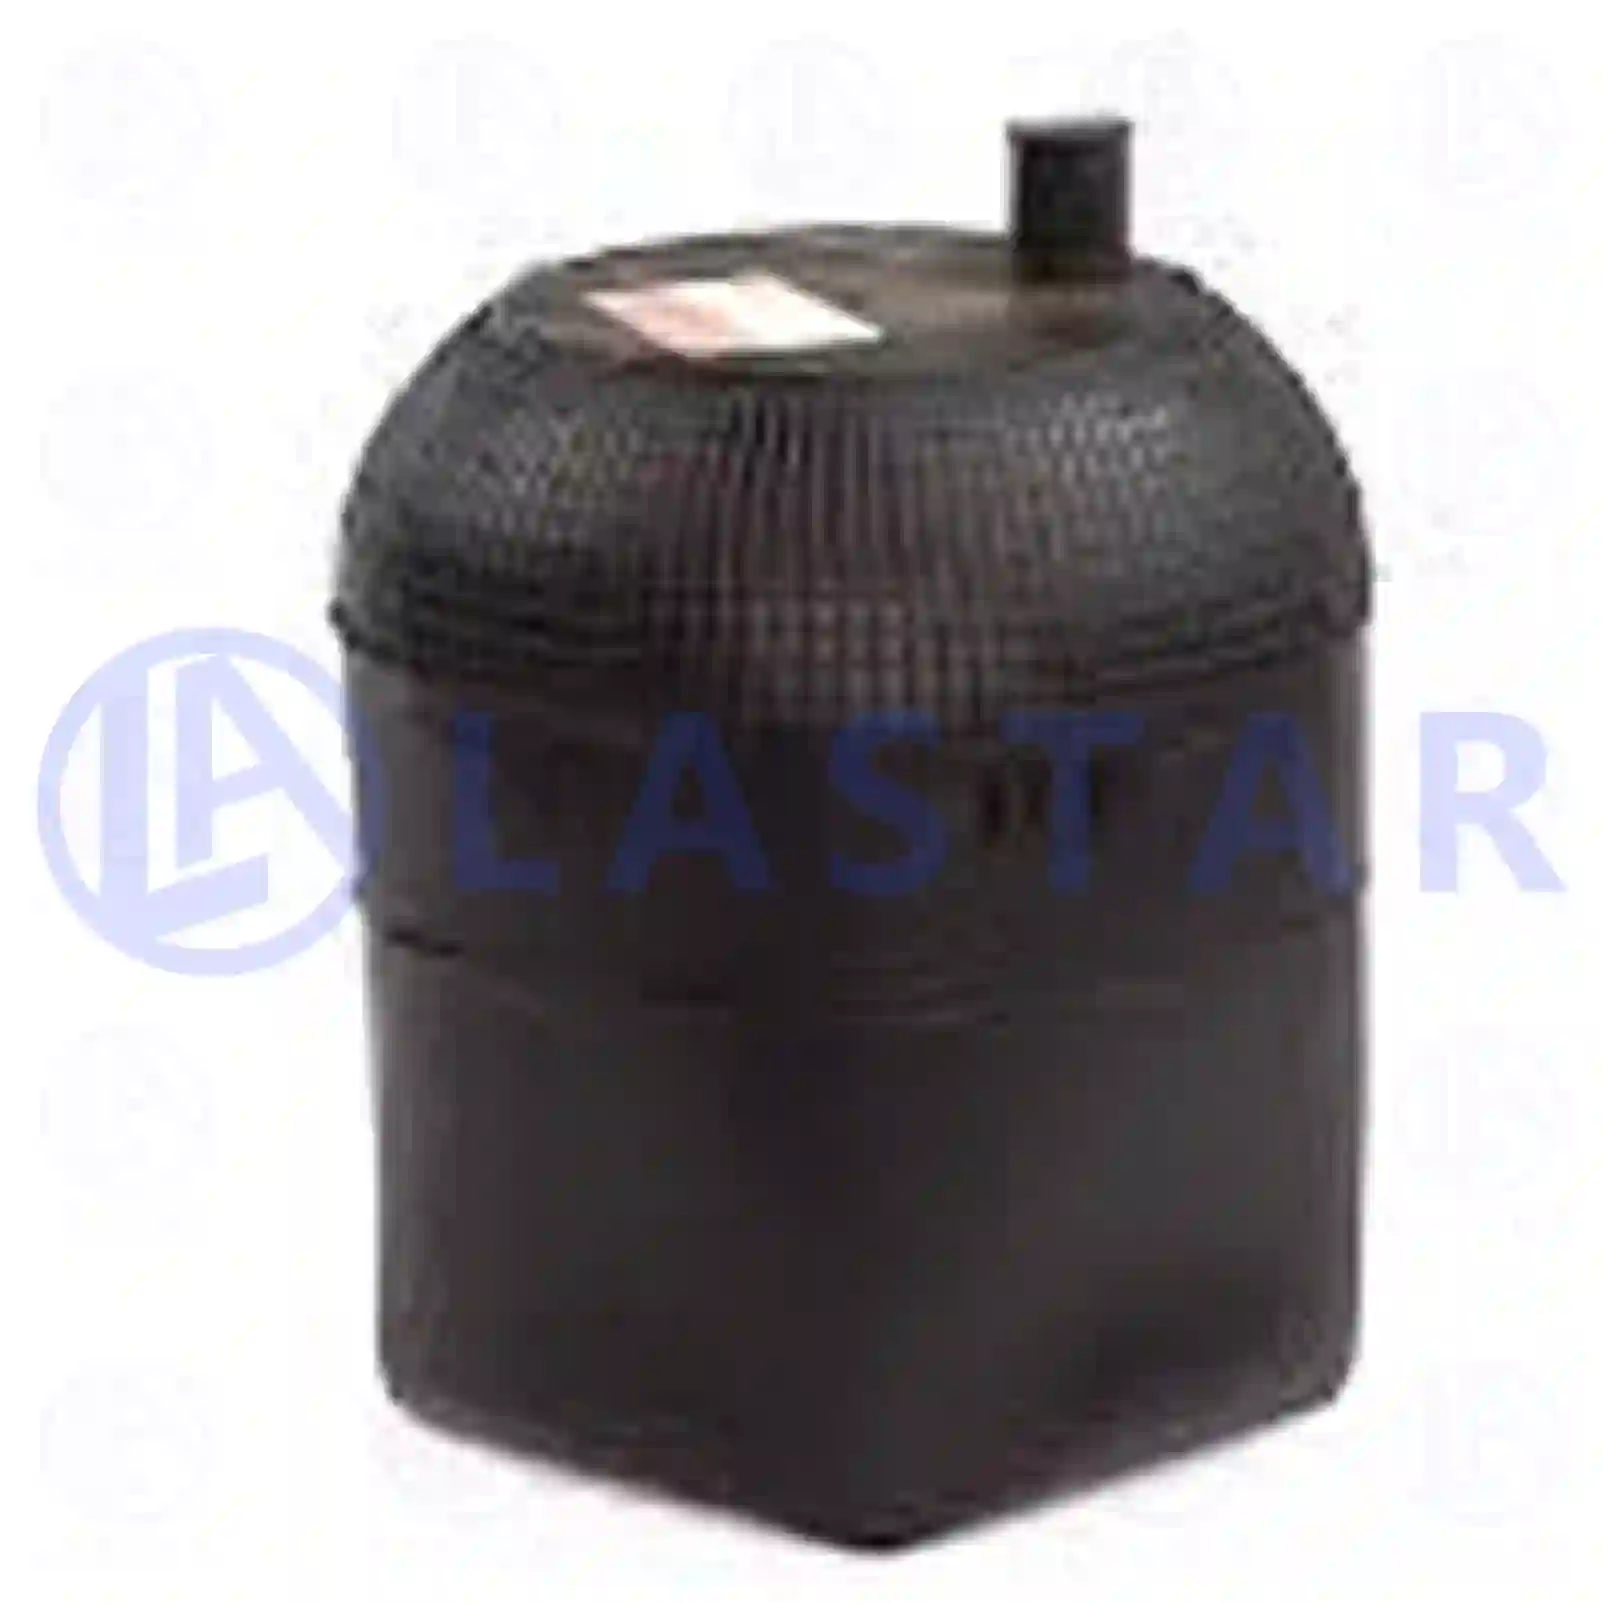 Air spring, without piston, 77728164, 9423200401, 9423280001, 9423280401, , , ||  77728164 Lastar Spare Part | Truck Spare Parts, Auotomotive Spare Parts Air spring, without piston, 77728164, 9423200401, 9423280001, 9423280401, , , ||  77728164 Lastar Spare Part | Truck Spare Parts, Auotomotive Spare Parts